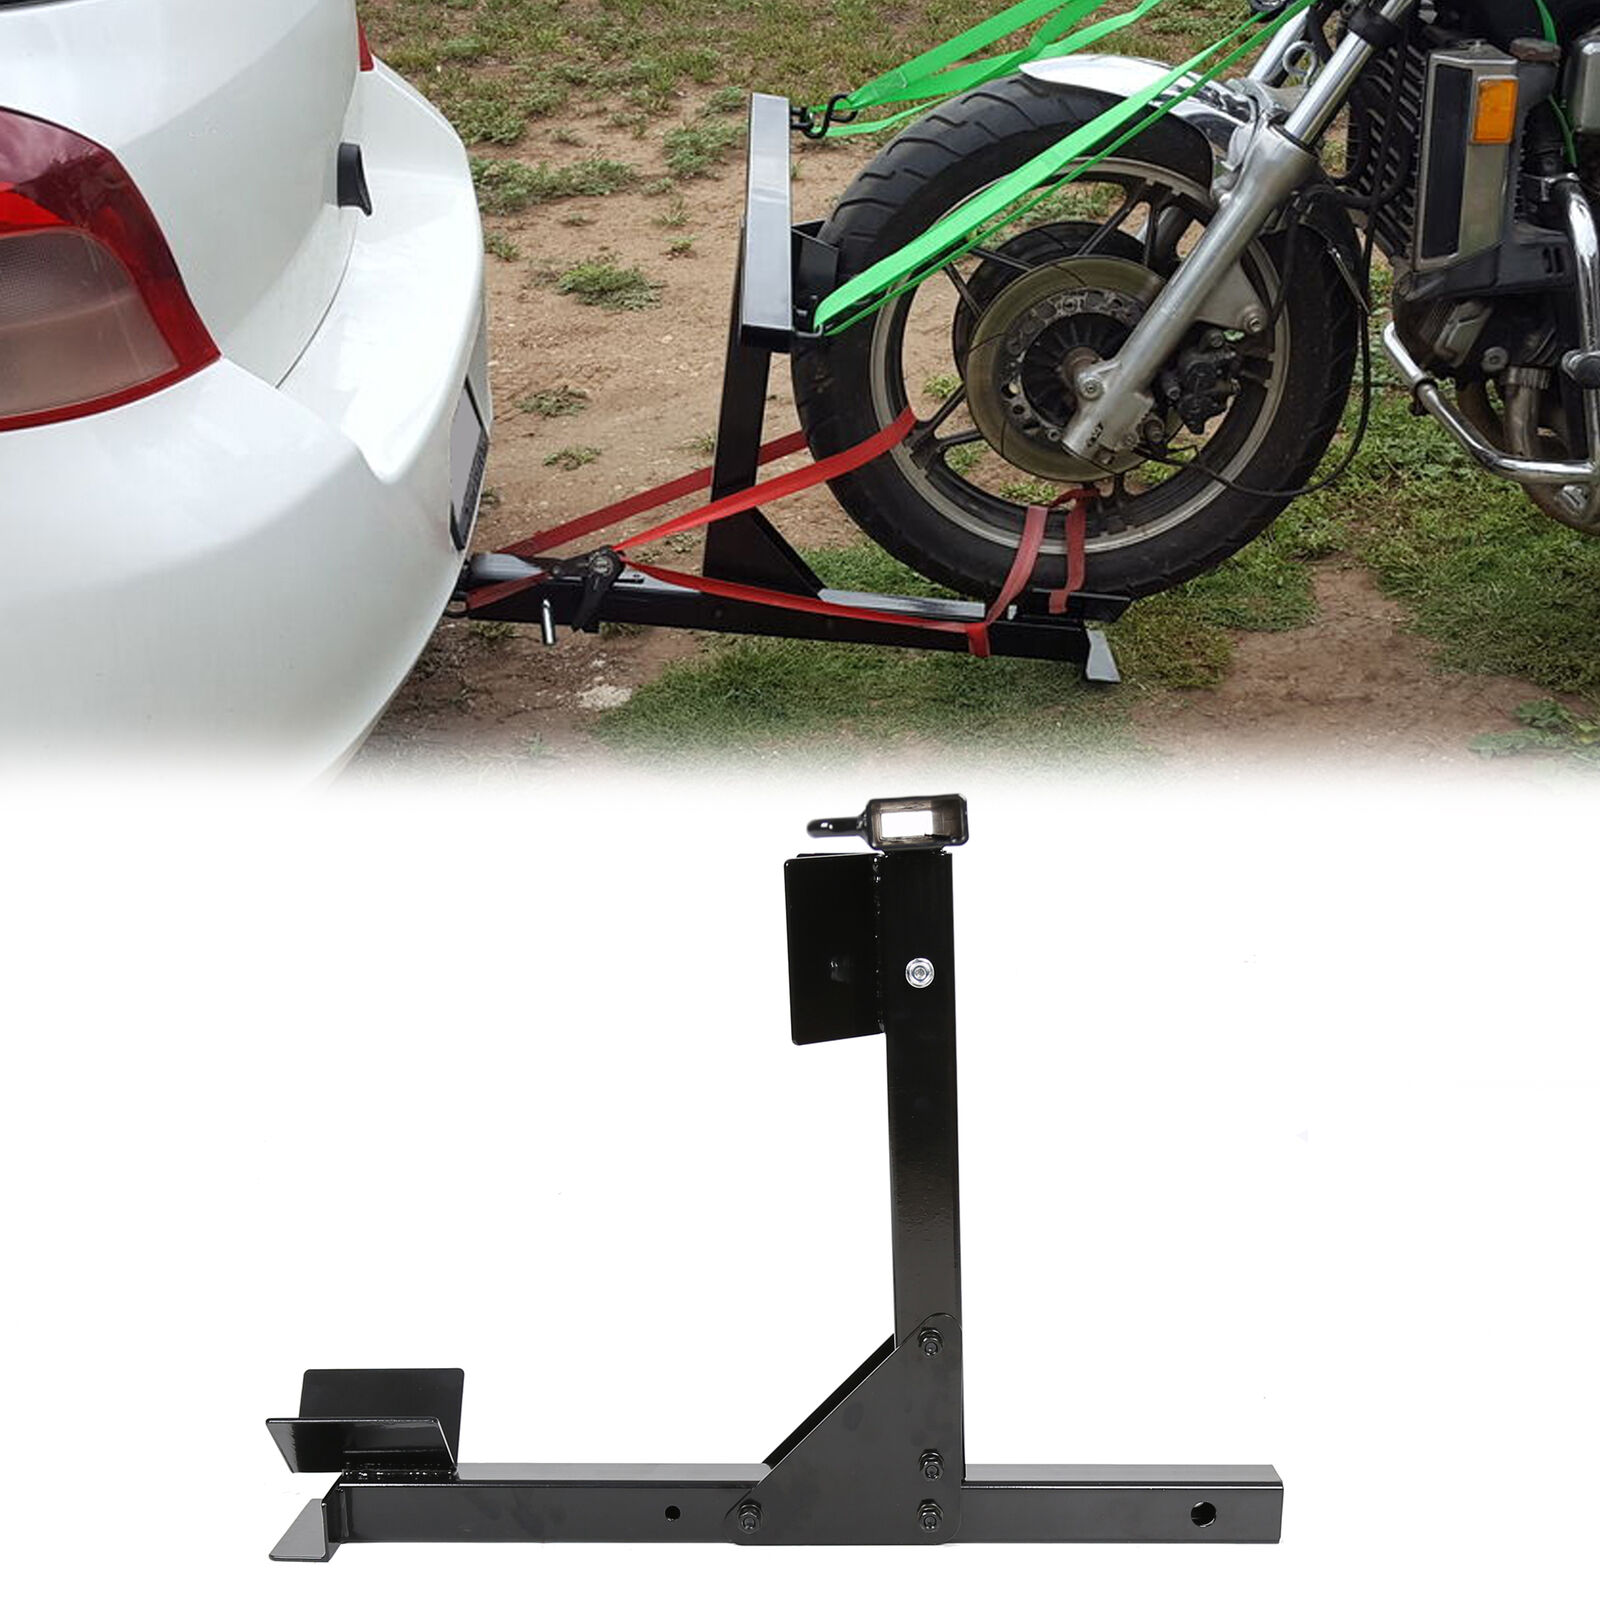 Motorcycle Trailer Carrier Tow Dolly Hauler Hitch Rack W/ FREE TIE-DOWN BAR